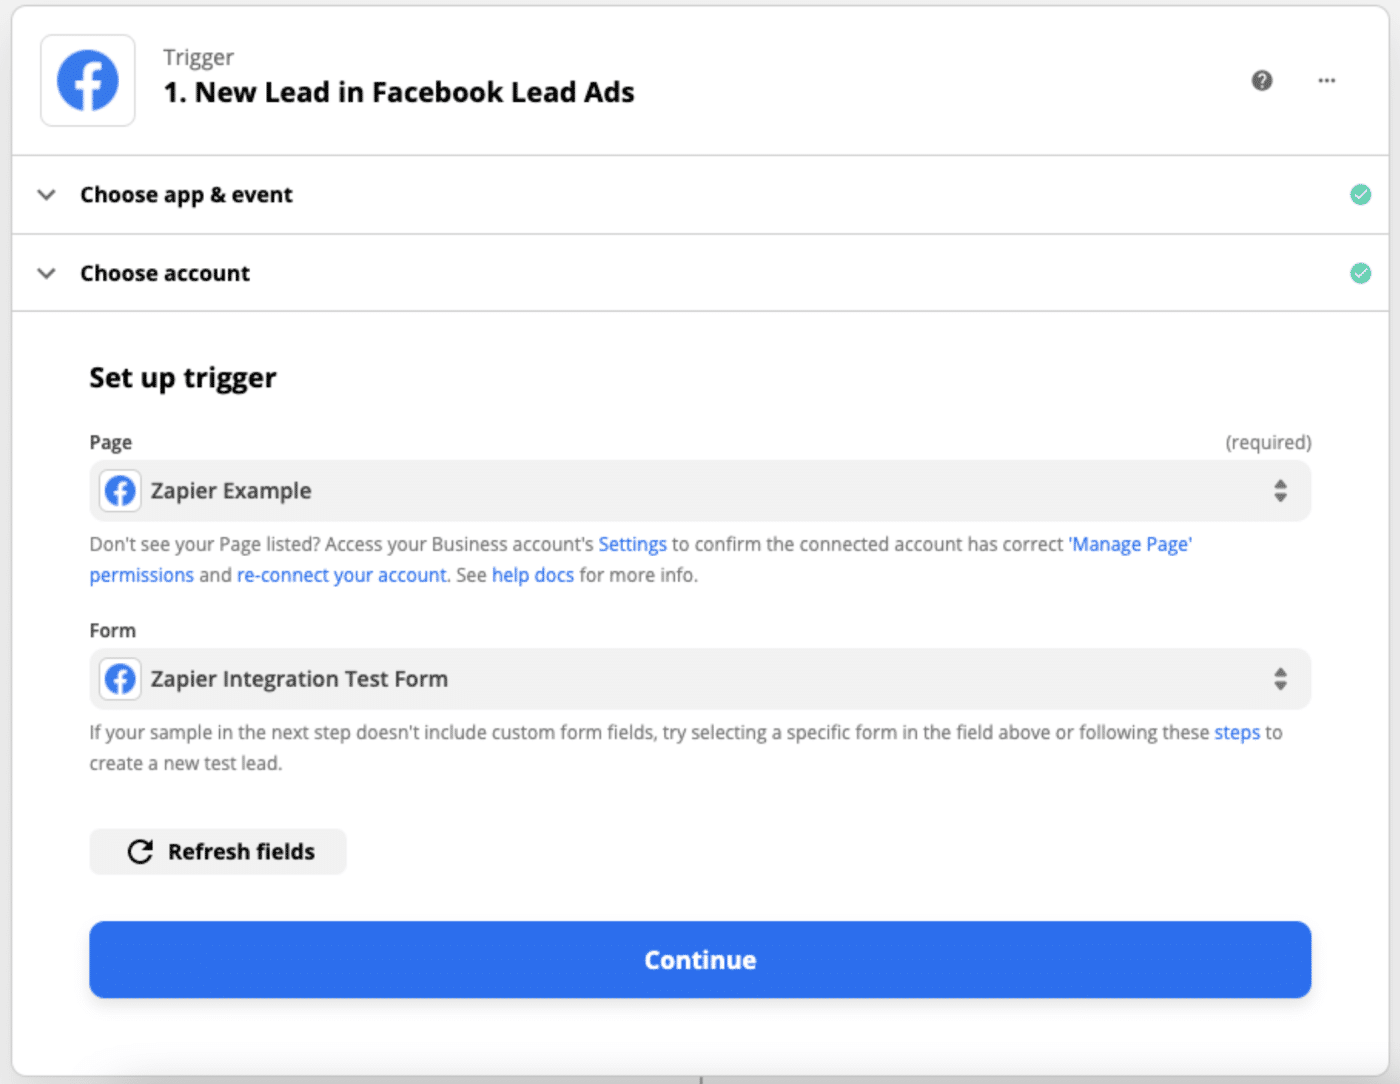  customize your trigger by selecting a Facebook page